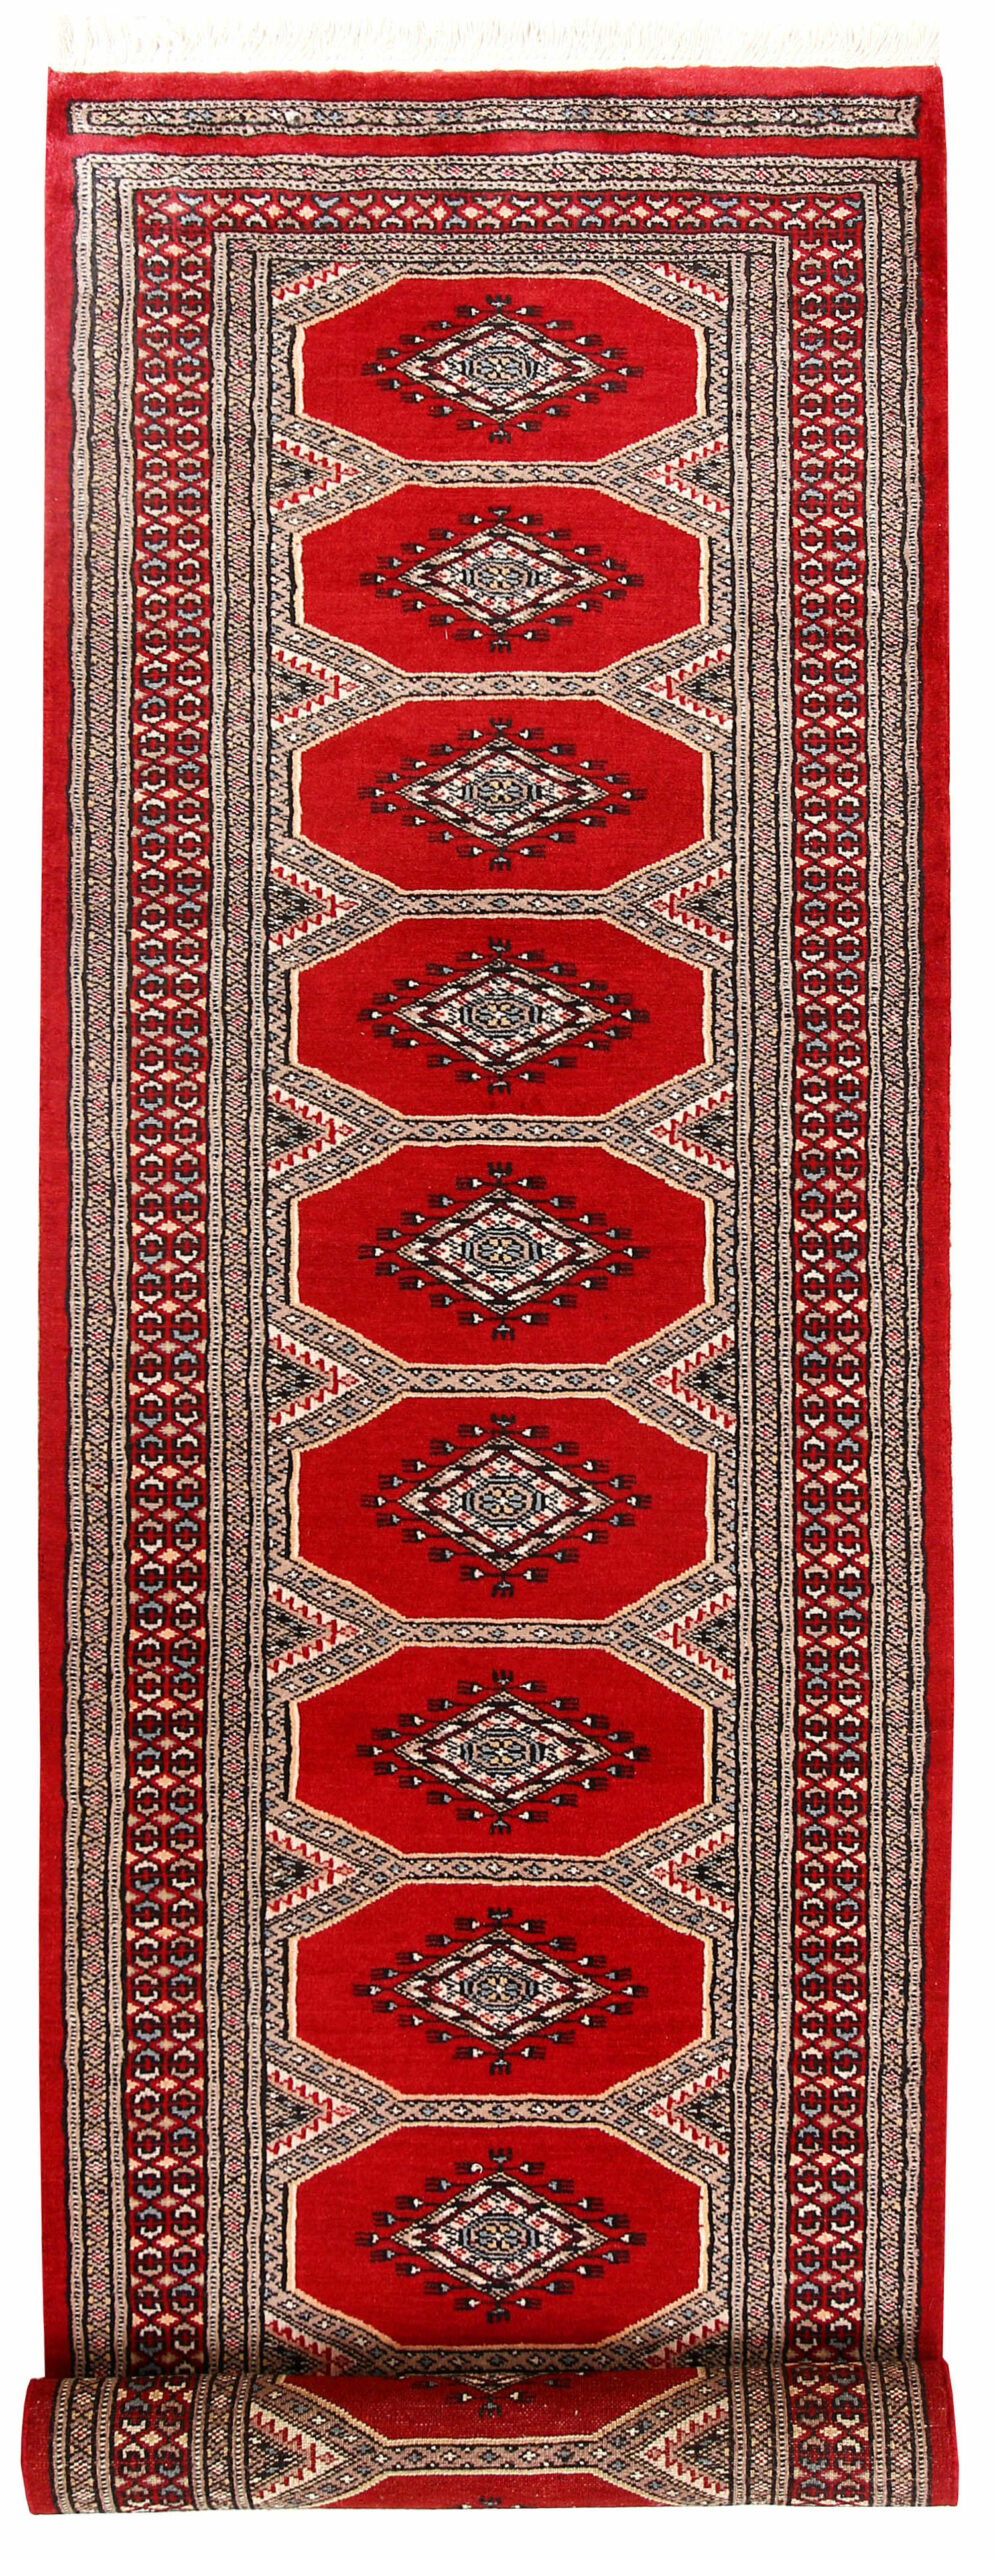 Quickly Pakistani Rugs